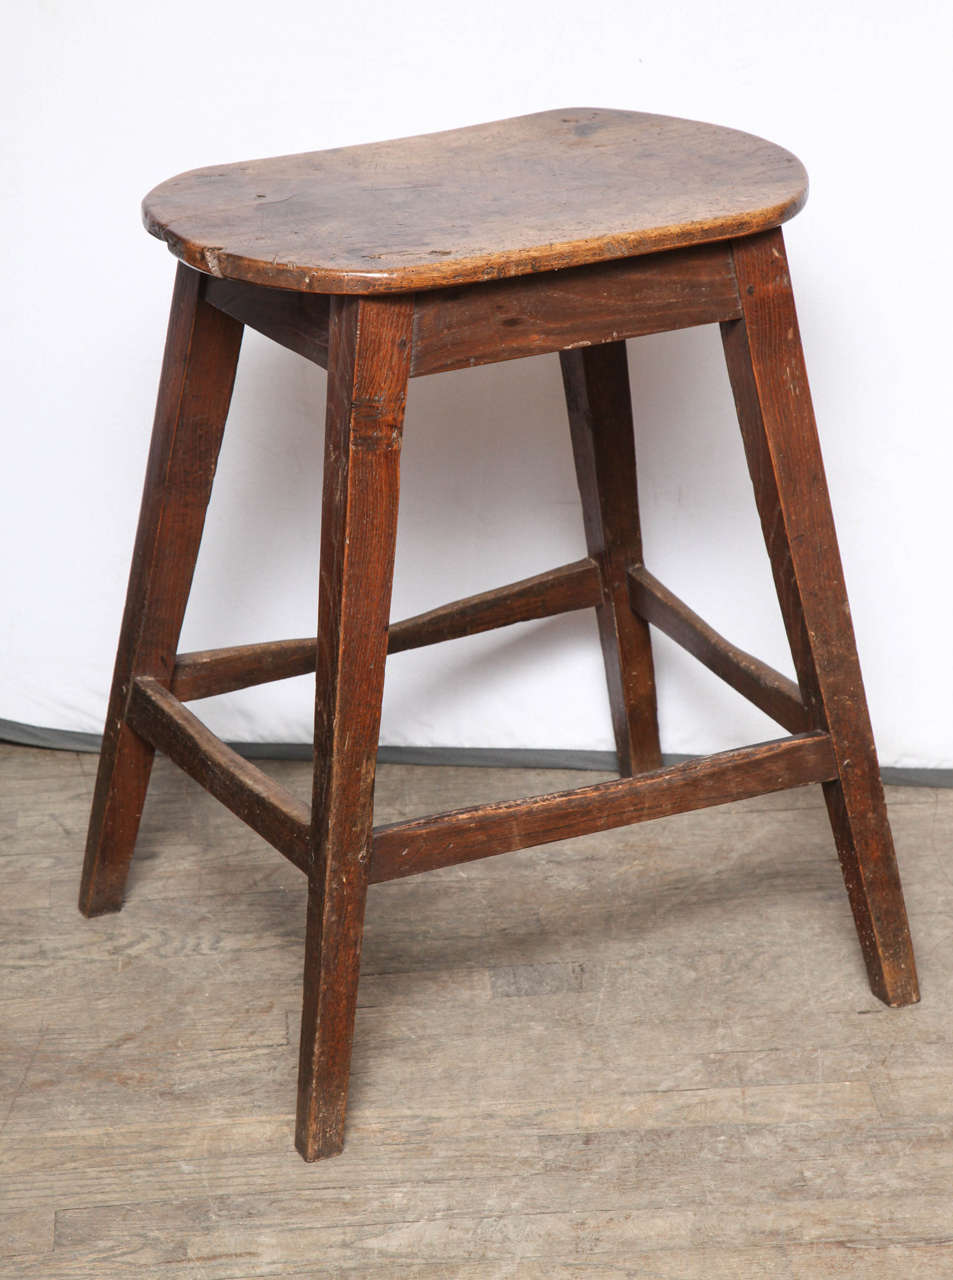 Rare, unusually large kitchen stool. 

Handpicked by buyers at Ann-Morris, Inc.